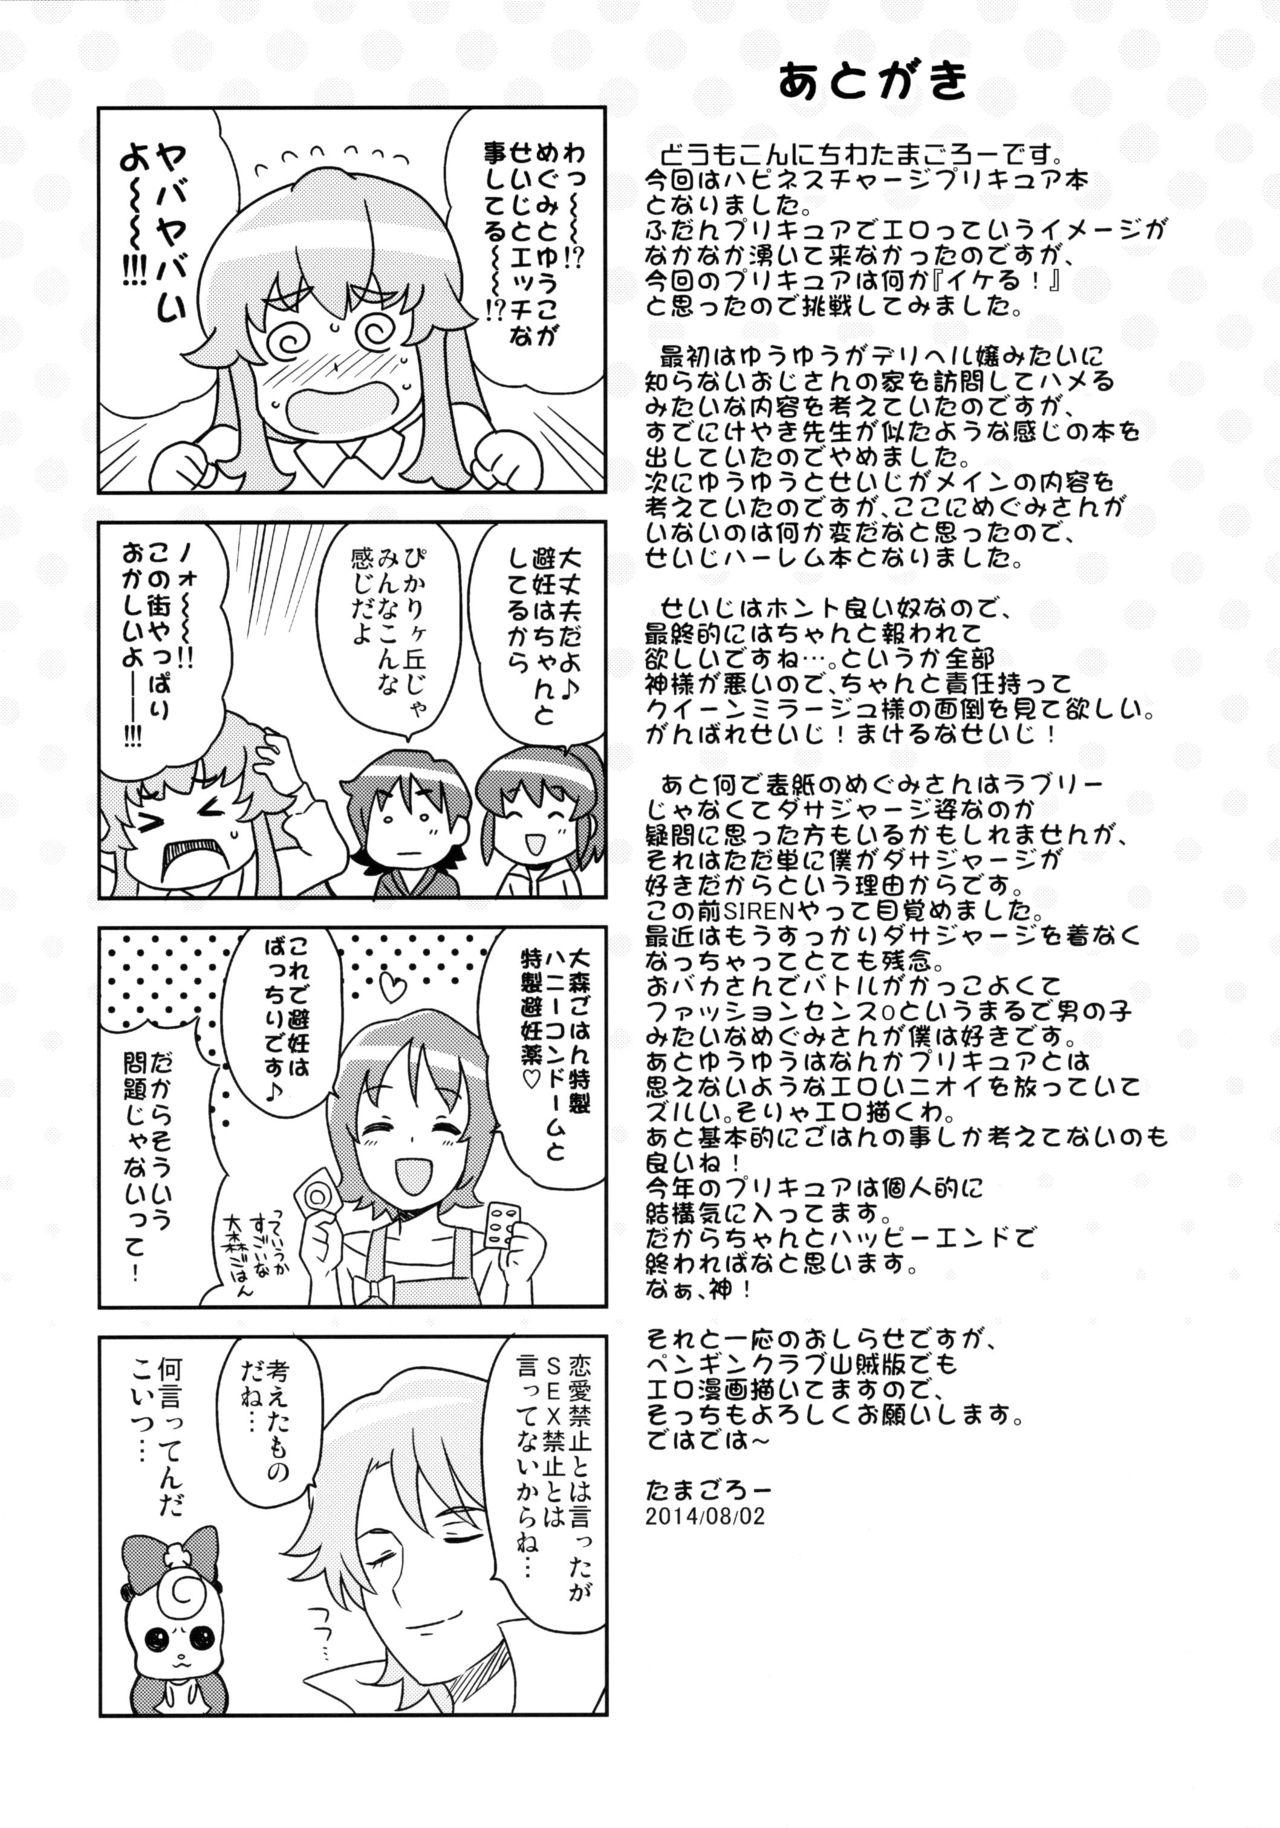 Kissing Chibikko Bitch Full charge - Happinesscharge precure Roundass - Page 24